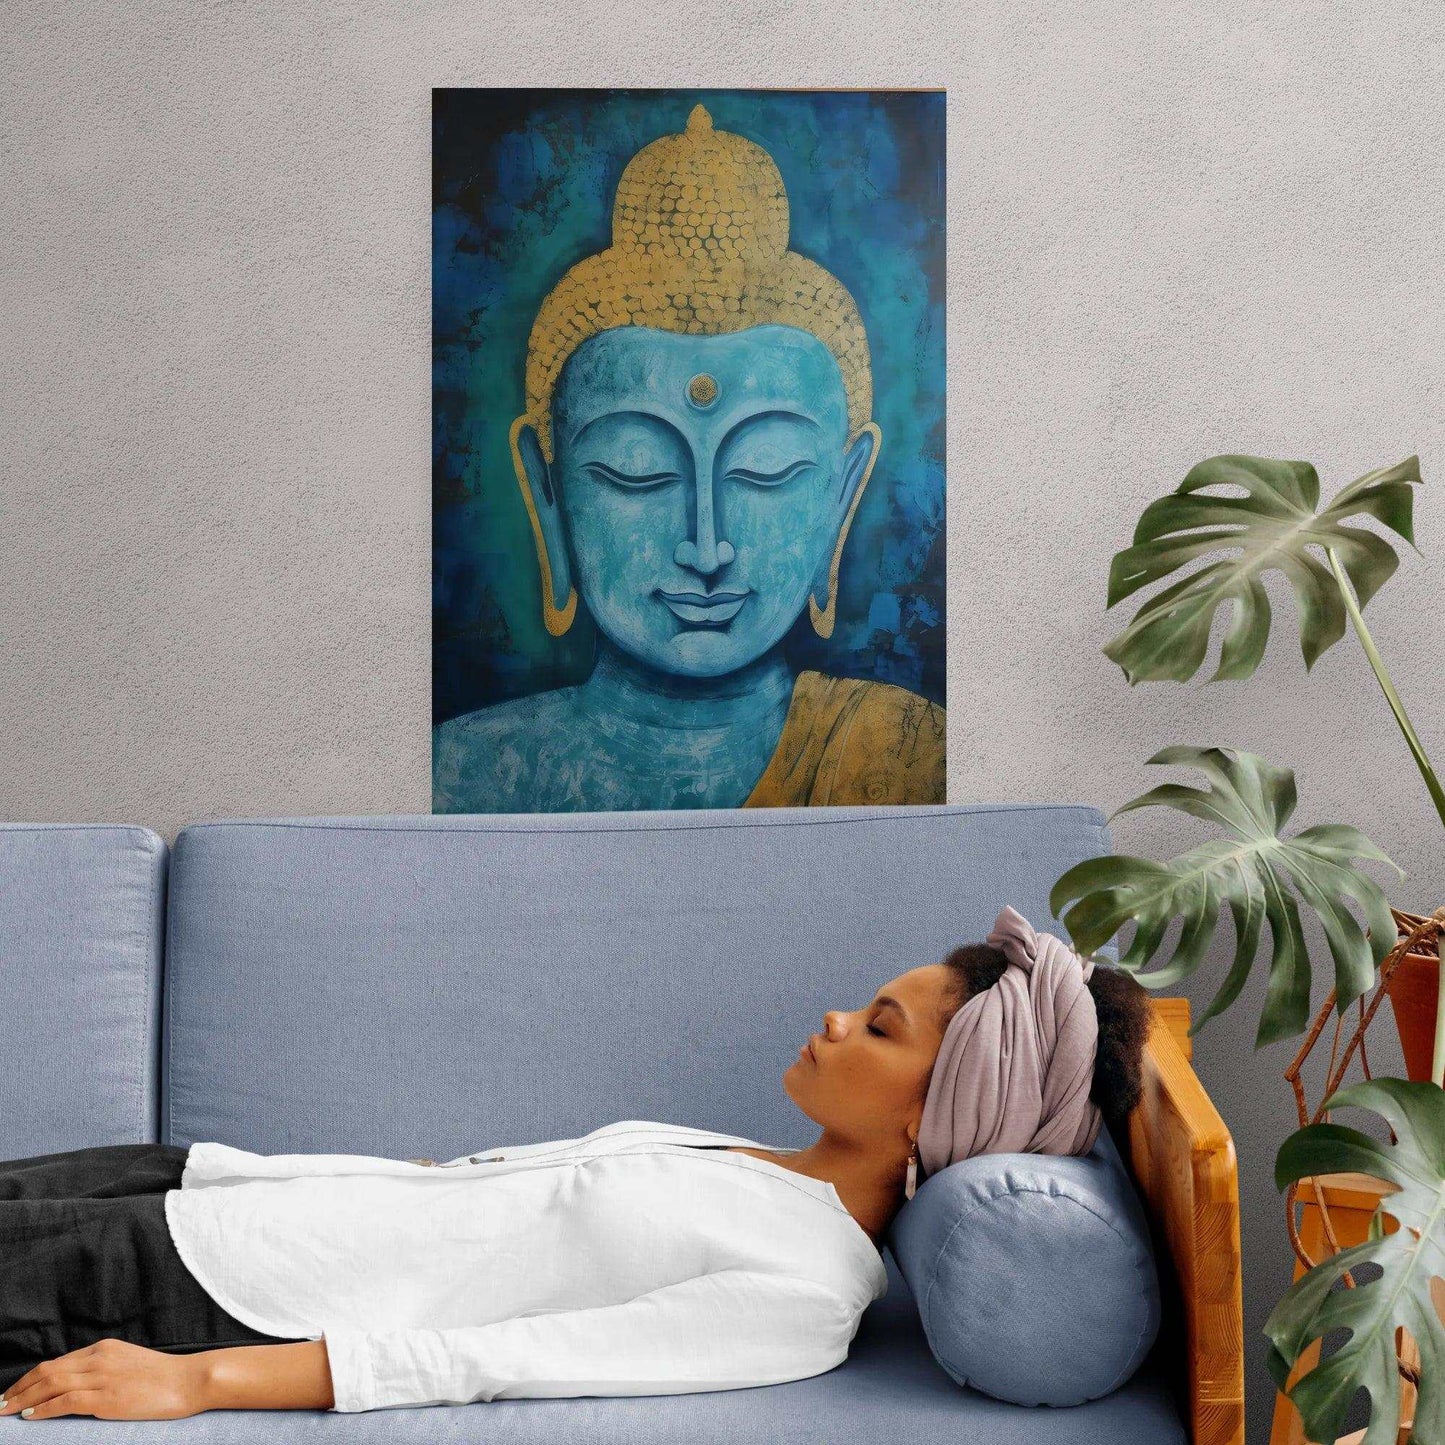 Relaxing living space with a woman reclining on a light grey couch, a serene blue and gold Buddha artwork hanging above, adding a tranquil ambiance next to an indoor plant, conveying a sense of peace and meditation.